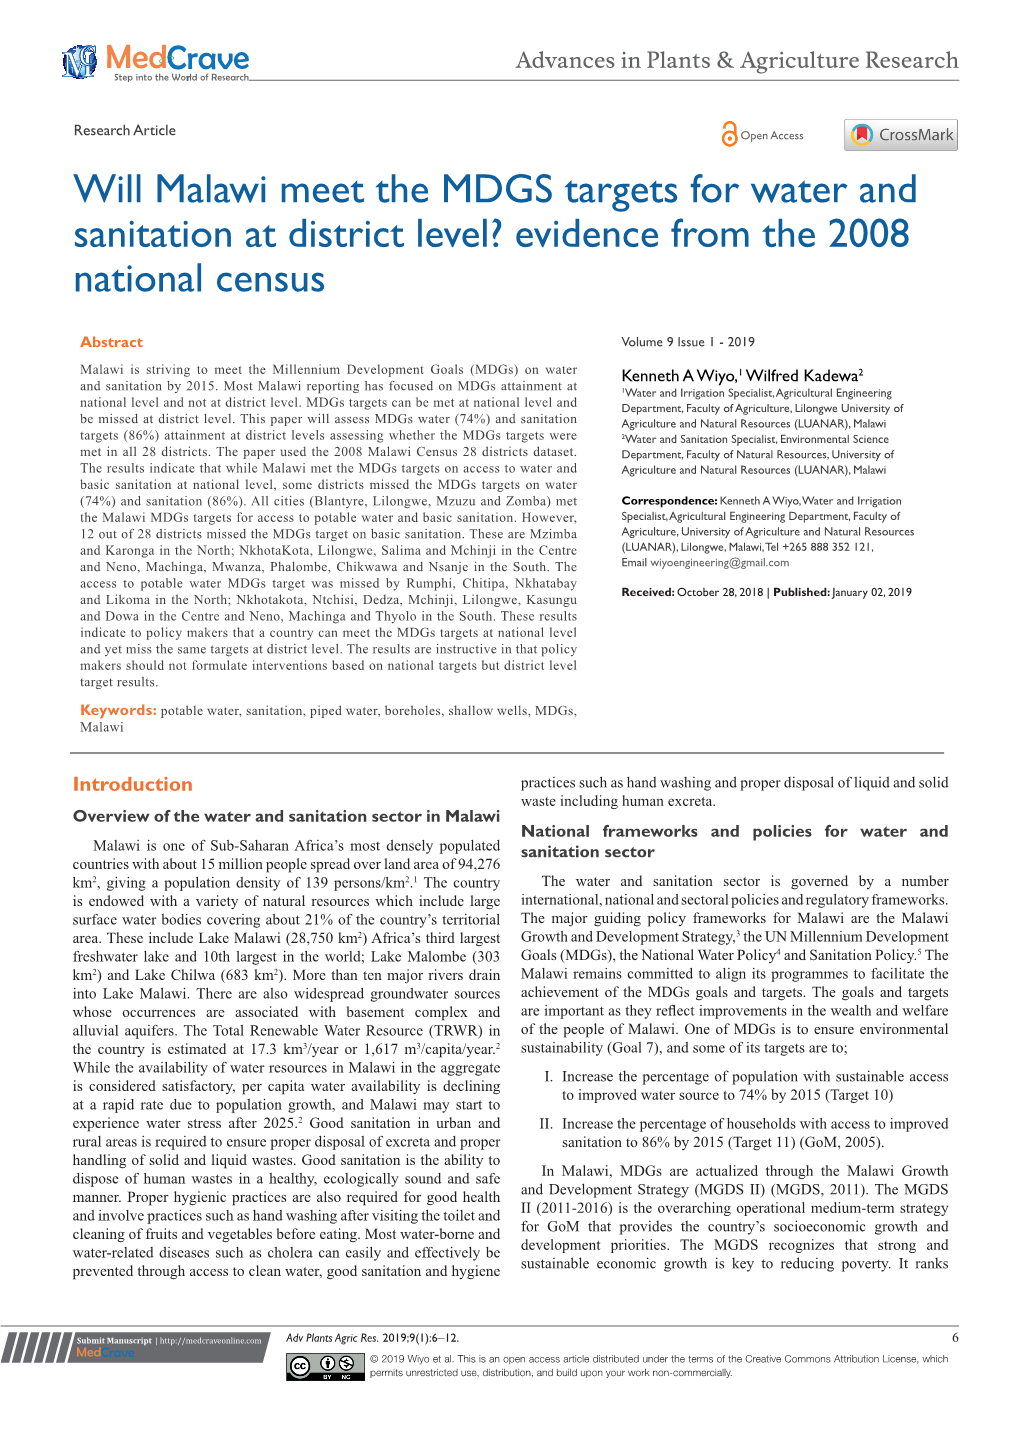 Will Malawi Meet the MDGS Targets for Water and Sanitation at District Level? Evidence from the 2008 National Census